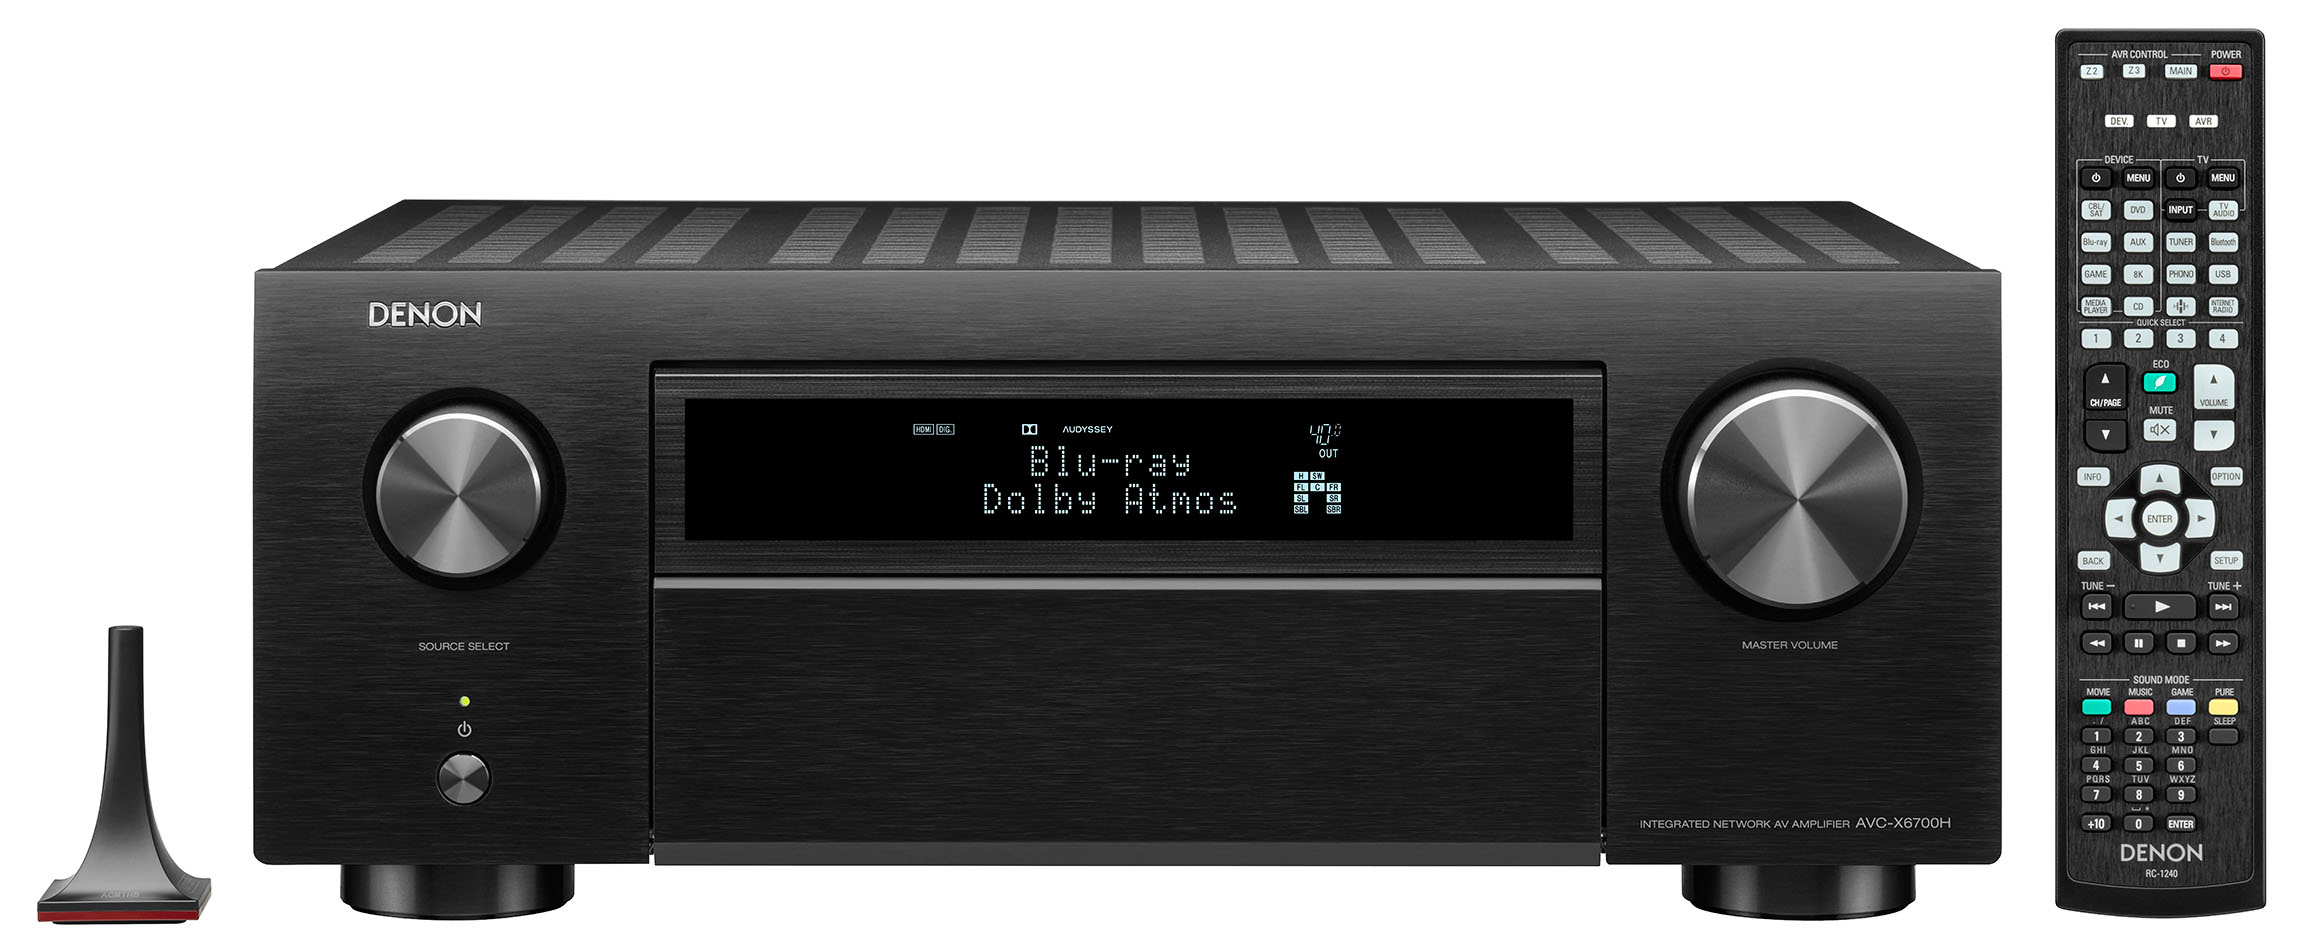 Denon AVCX6700H 11.2ch 8K AV Amplifier with 3D Audio Dolby Atmos HEOS Built-in and Voice Control Black